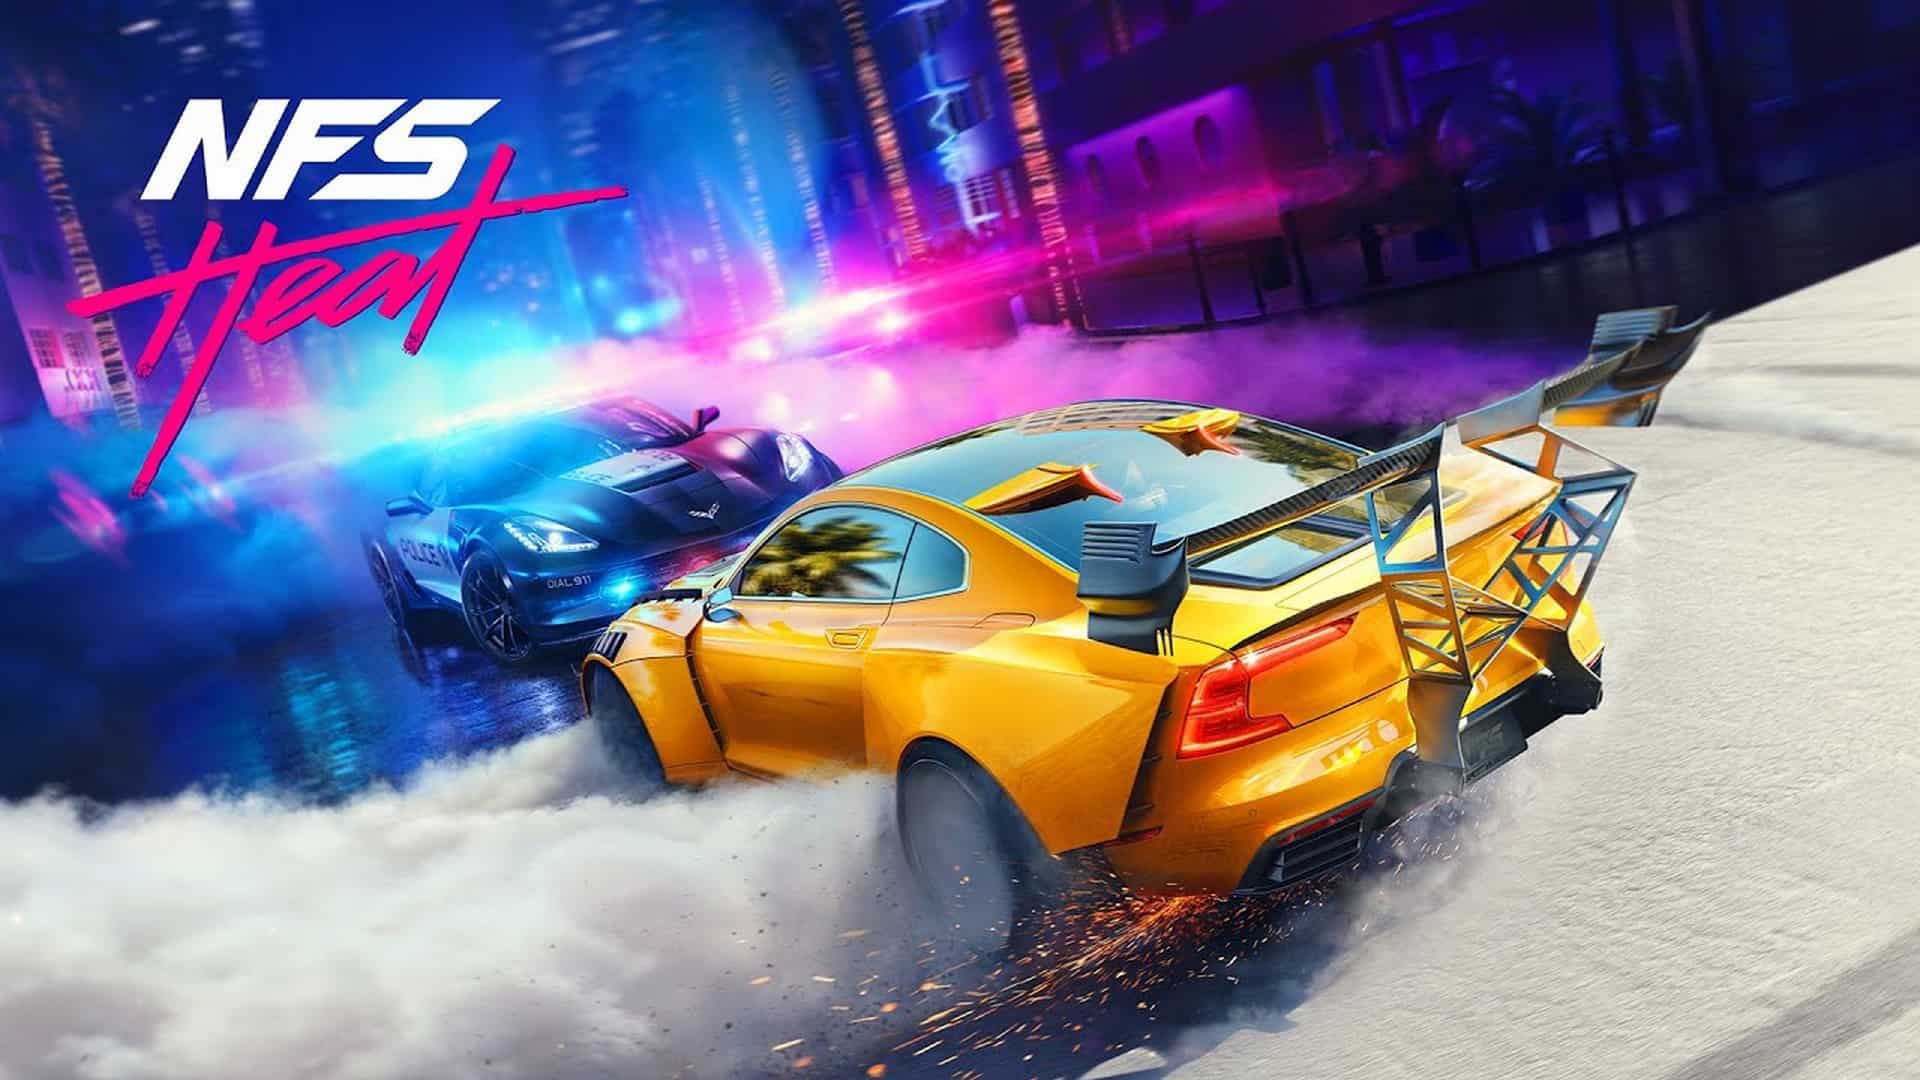 Augmented Reality Makes NFS Heat Studio Creations Come Alive